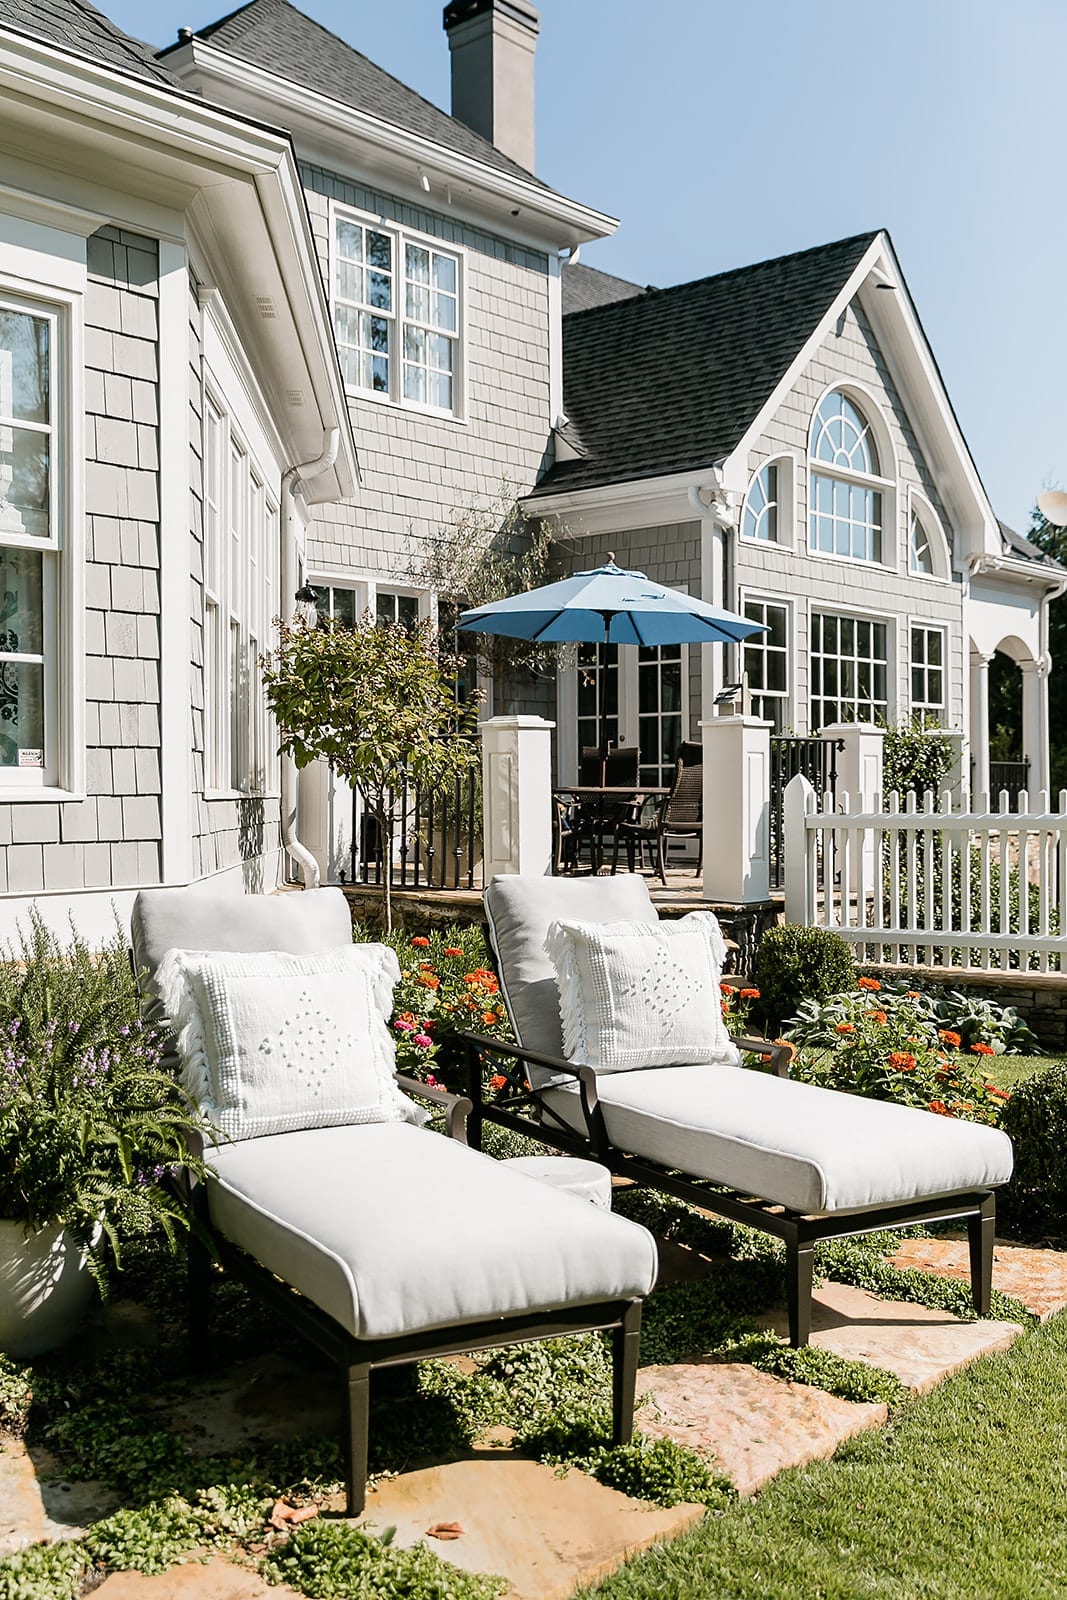 Woodard Furniture. Chaise lounges in Andover Collection. Outdoor furniture in light gray. White and gray cedar home exterior with white picket fence and blue outdoor umbrella.